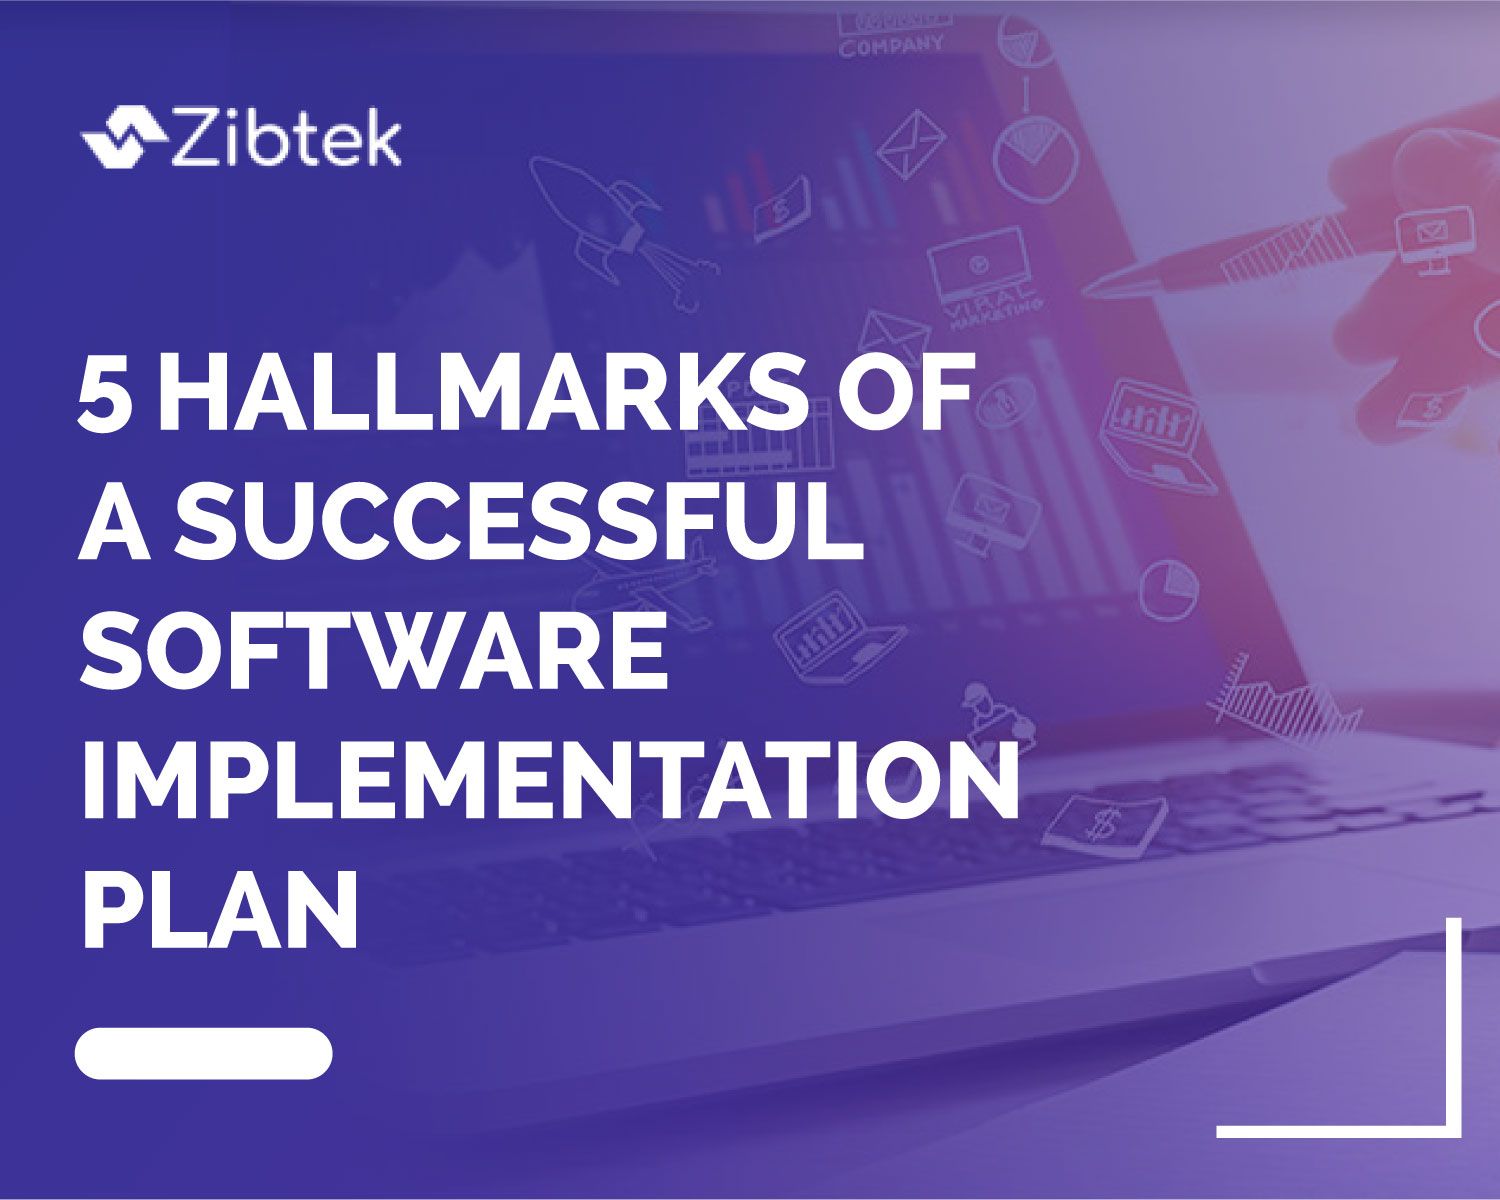 Software Implementation Plan: Here are 5 Hallmarks of a Successful One